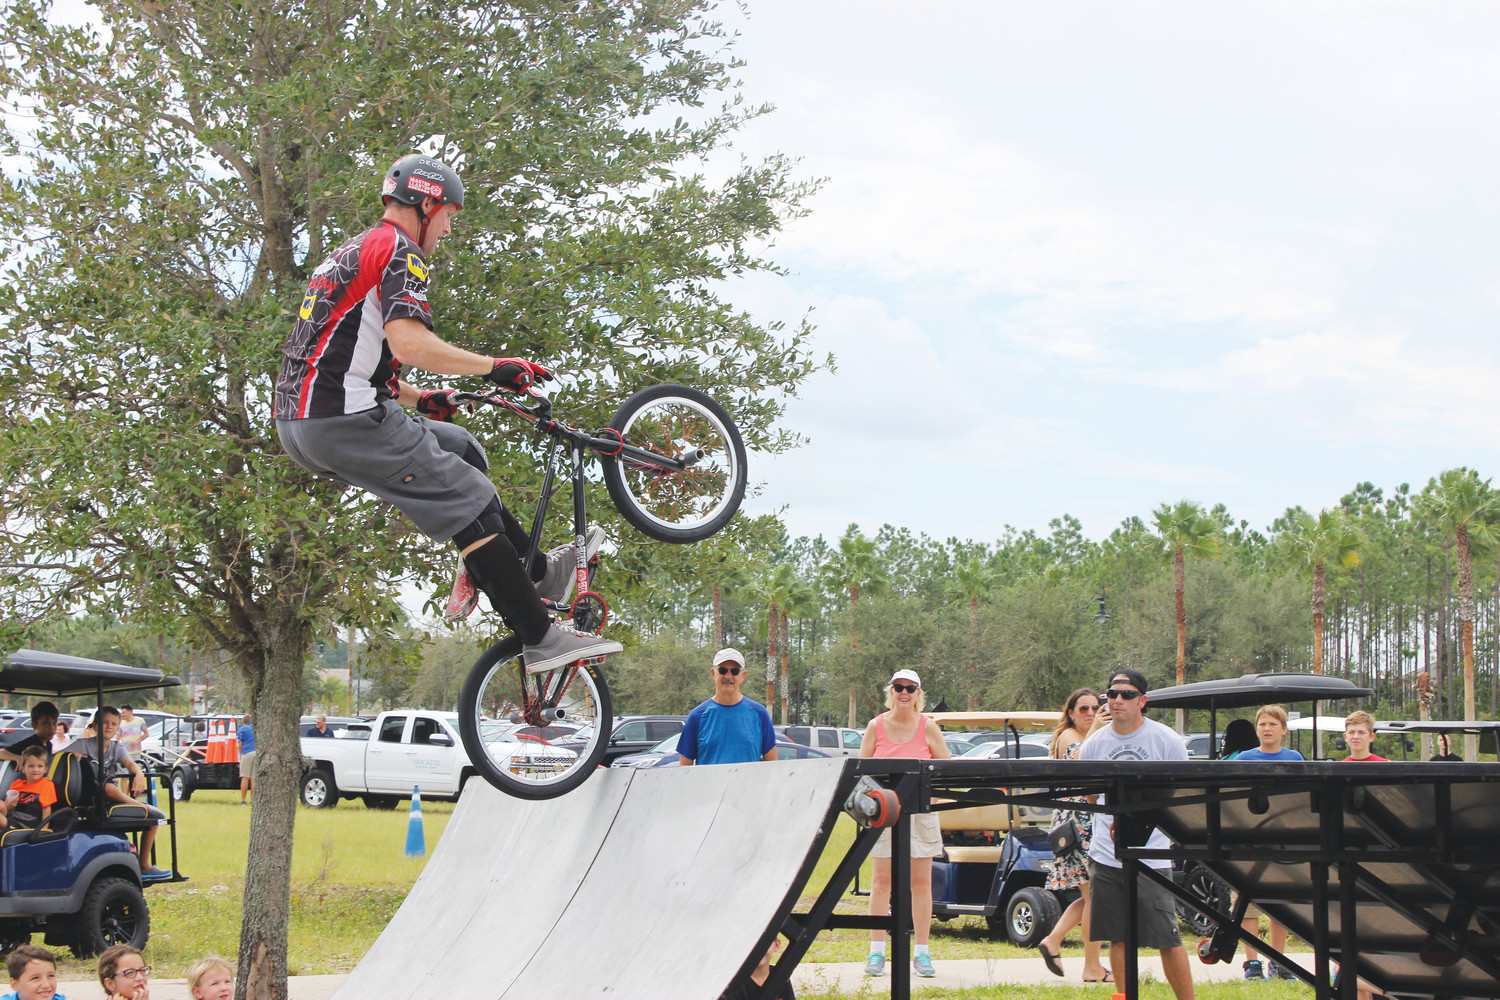 A member of Perfection on Wheel’s BMX Pros Trick Team performs a half-pipe trick in front of the crowd at the Nocatee Farmers Market Sept. 16. In addition to this action-packed show, visitors at the market enjoyed checking out over 70 vendors offering items such as organic produce, herbs, spices, unique foods, crafts, jewelry and more. The next Nocatee Farmers Market is Oct. 21, inviting the community to get into the fall spirit with Nocatee’s annual Fall Festival. The event takes place the third Saturday of each month on the Farmers Market Field at Nocatee Town Center.